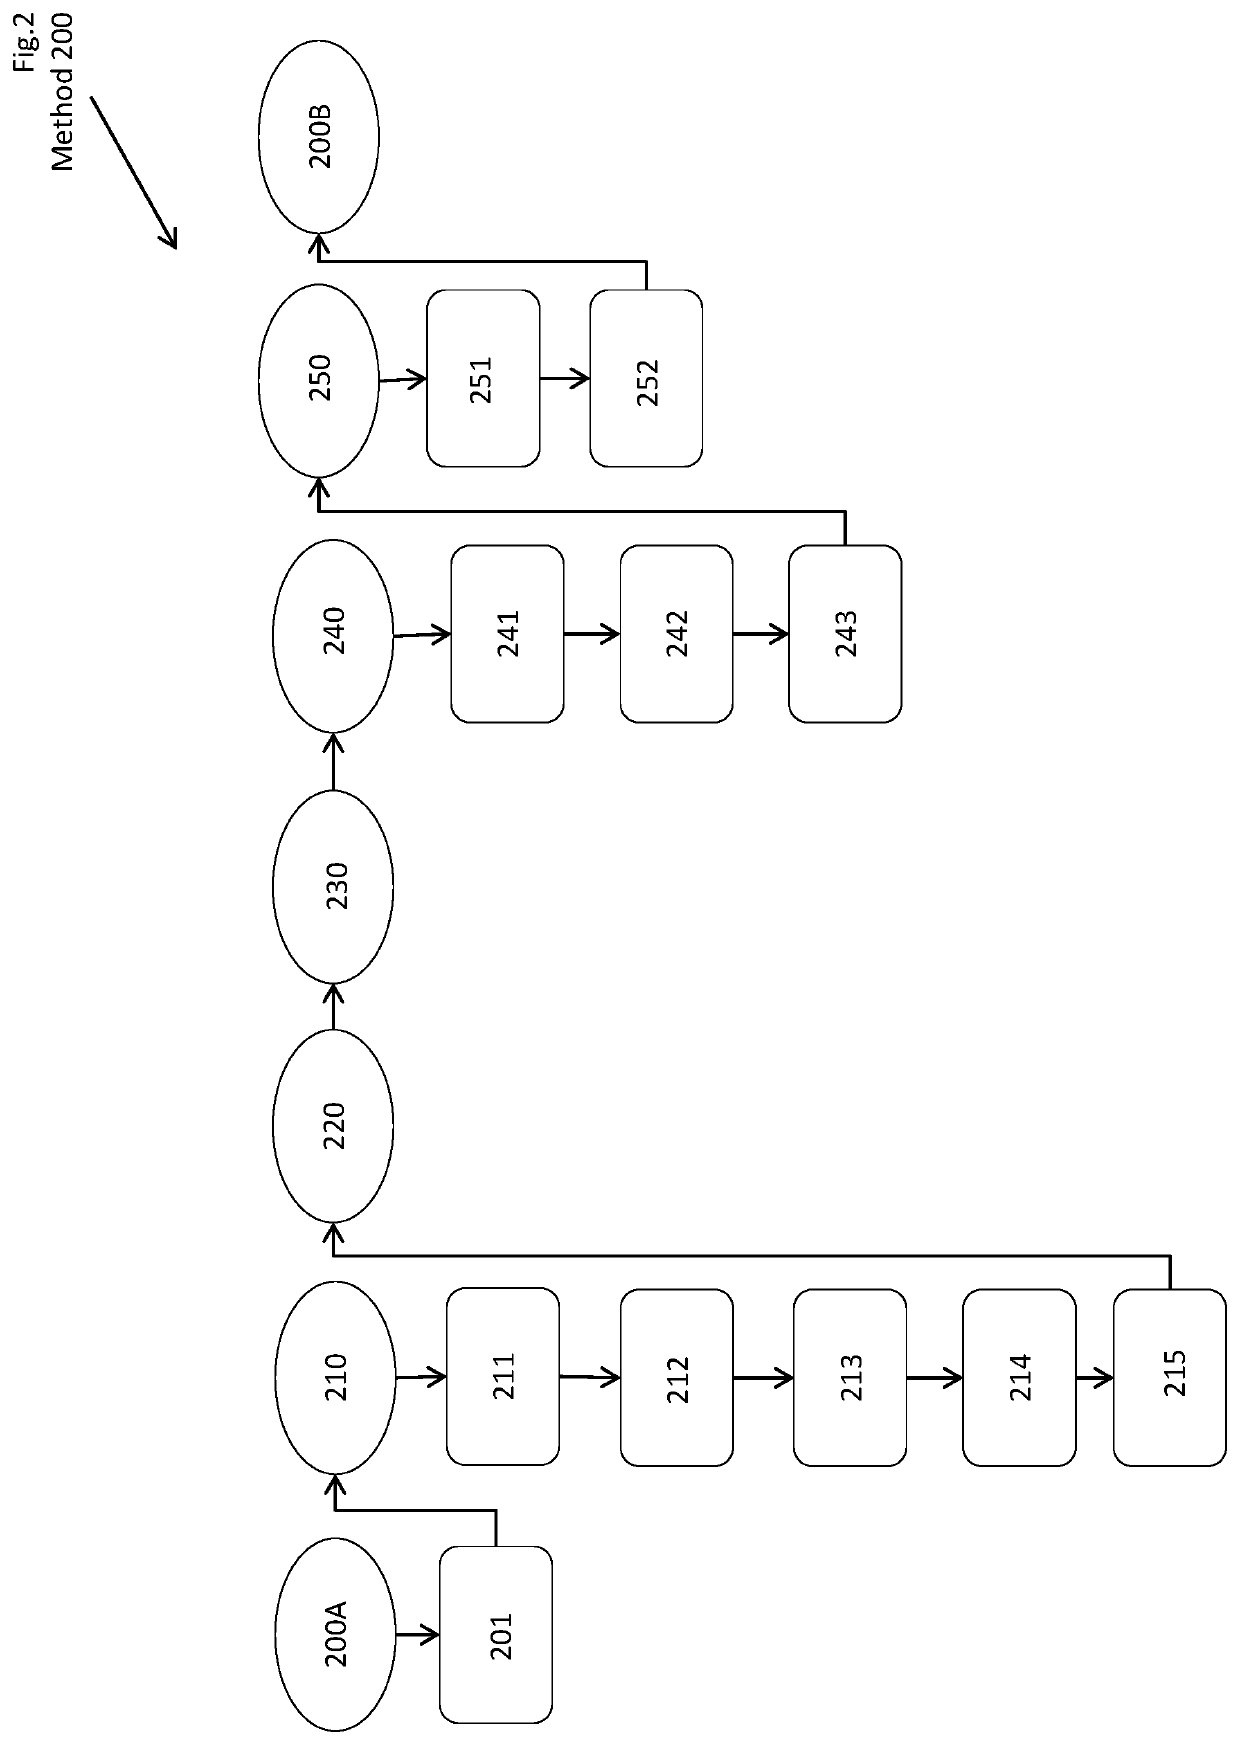 Parallel Distributed Networking